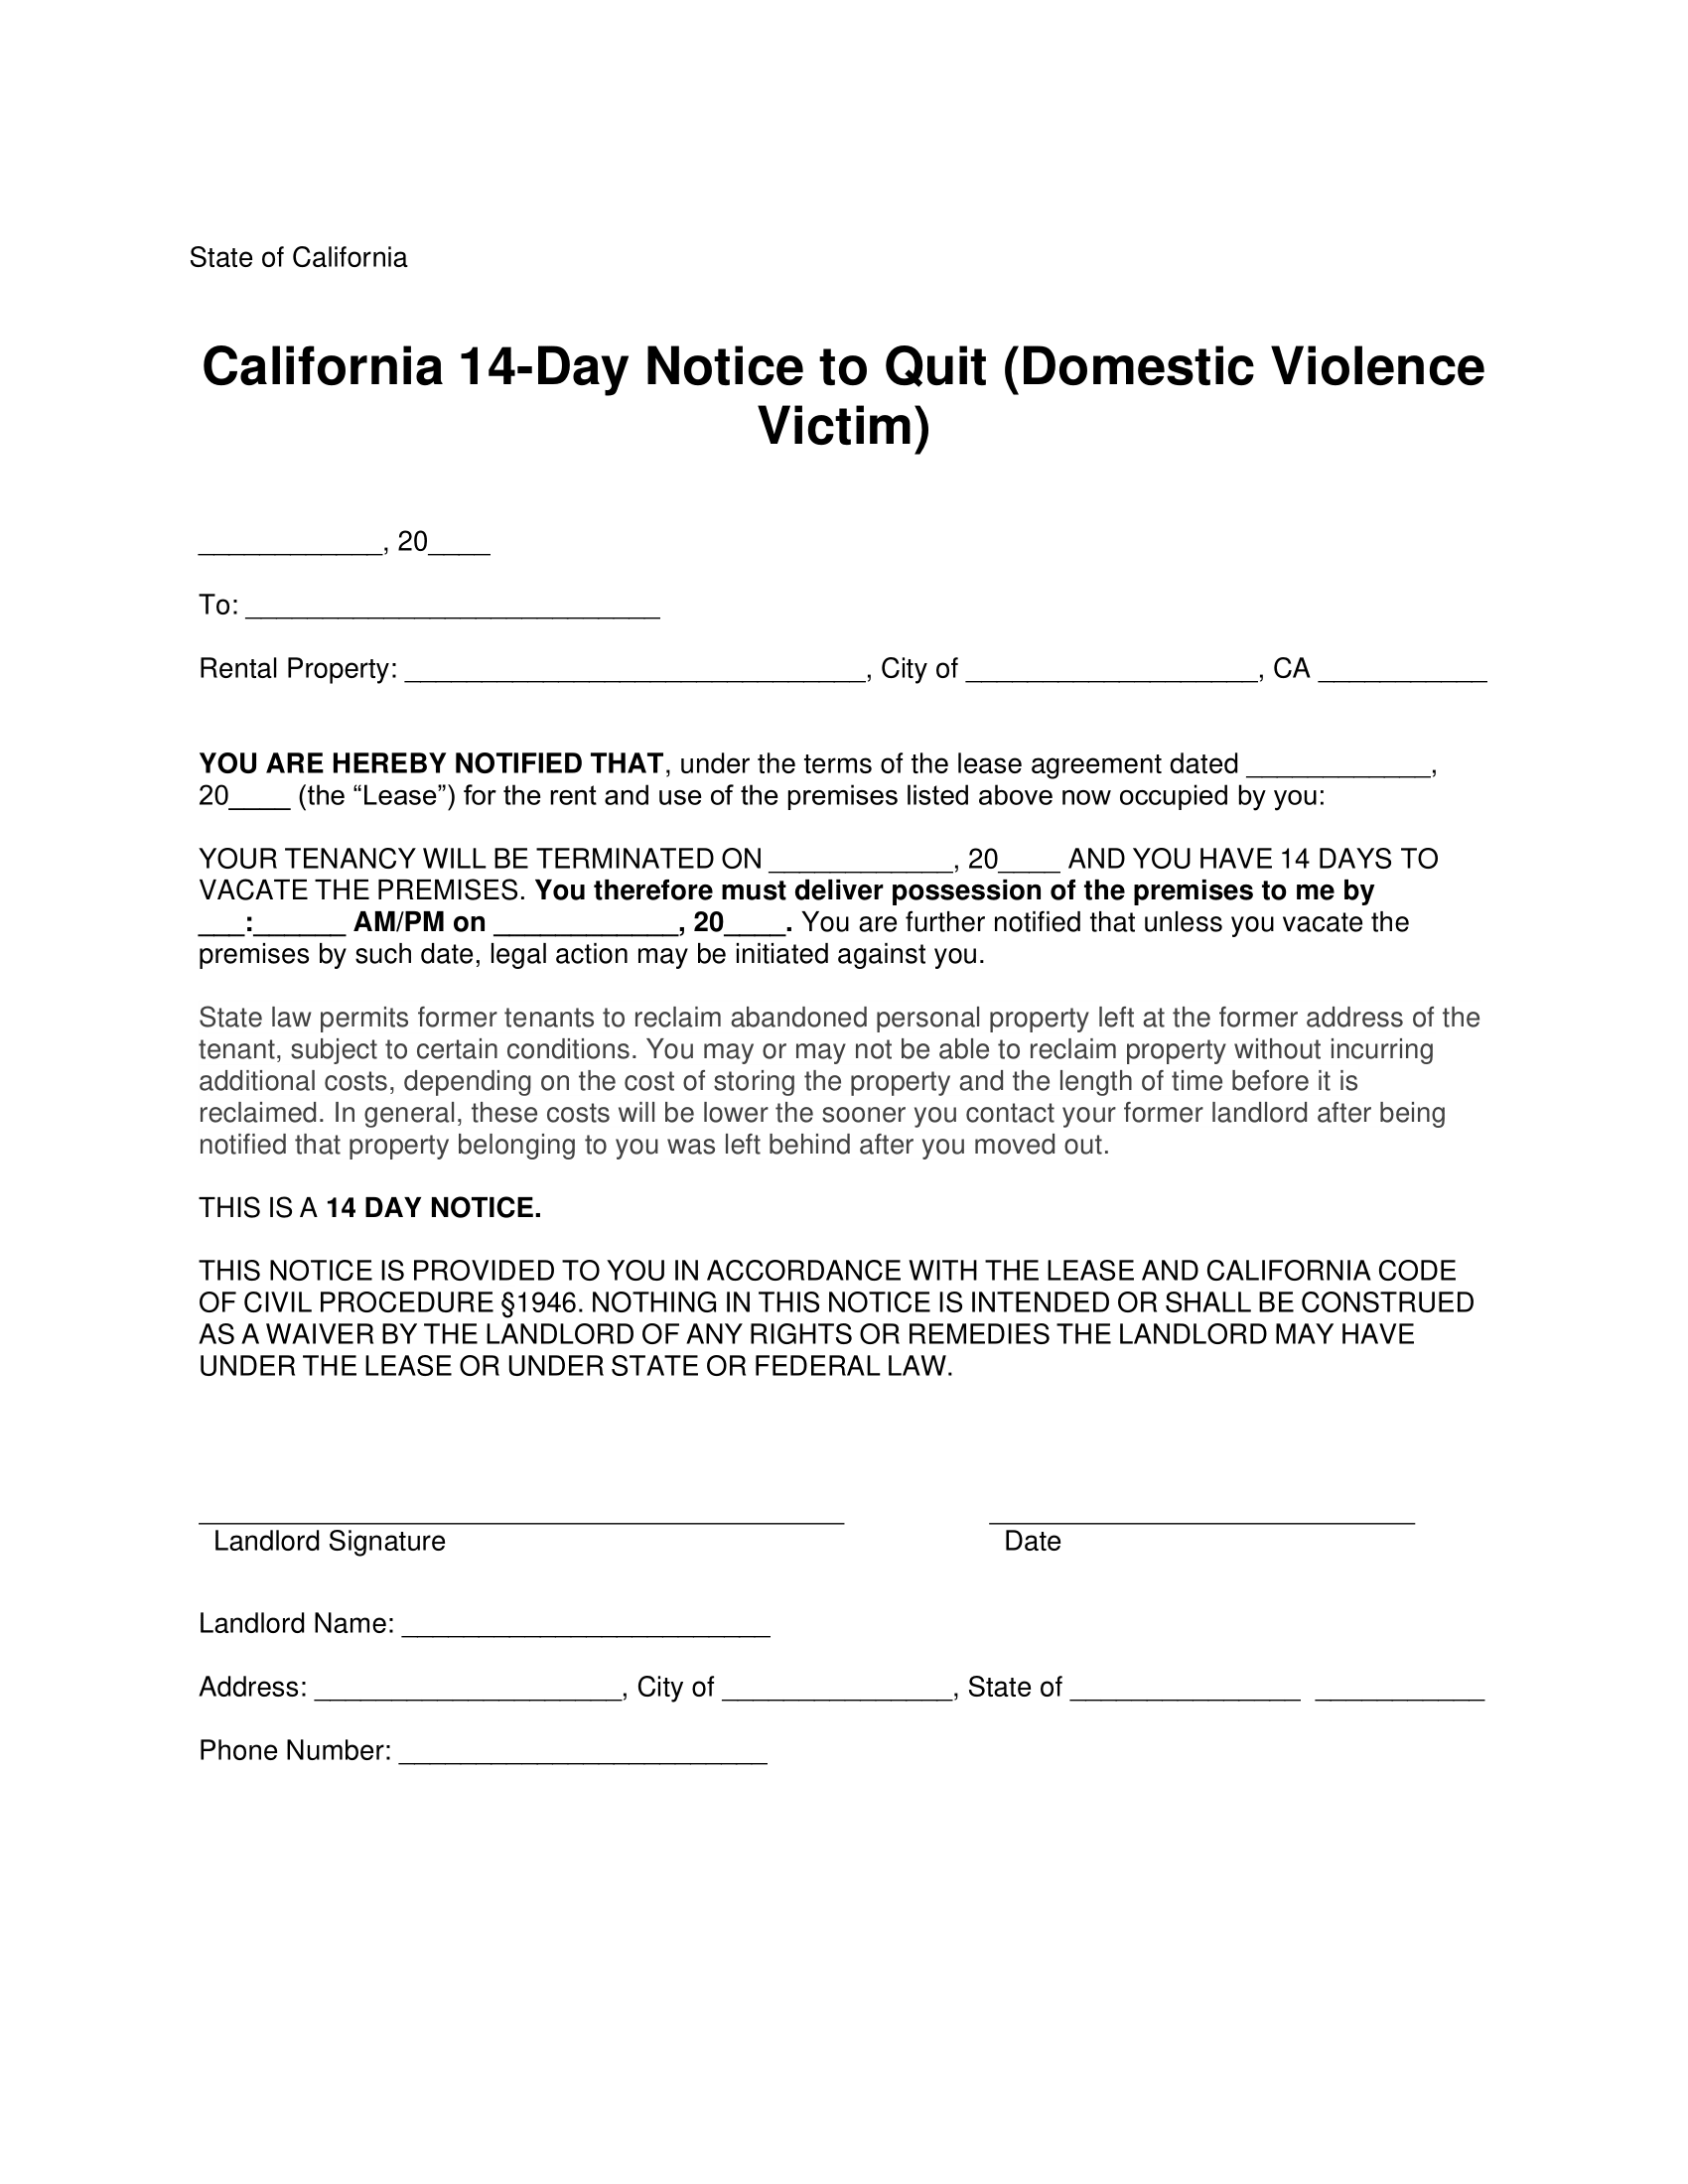 California 14-Day Notice to Quit Domestic Violence Victim